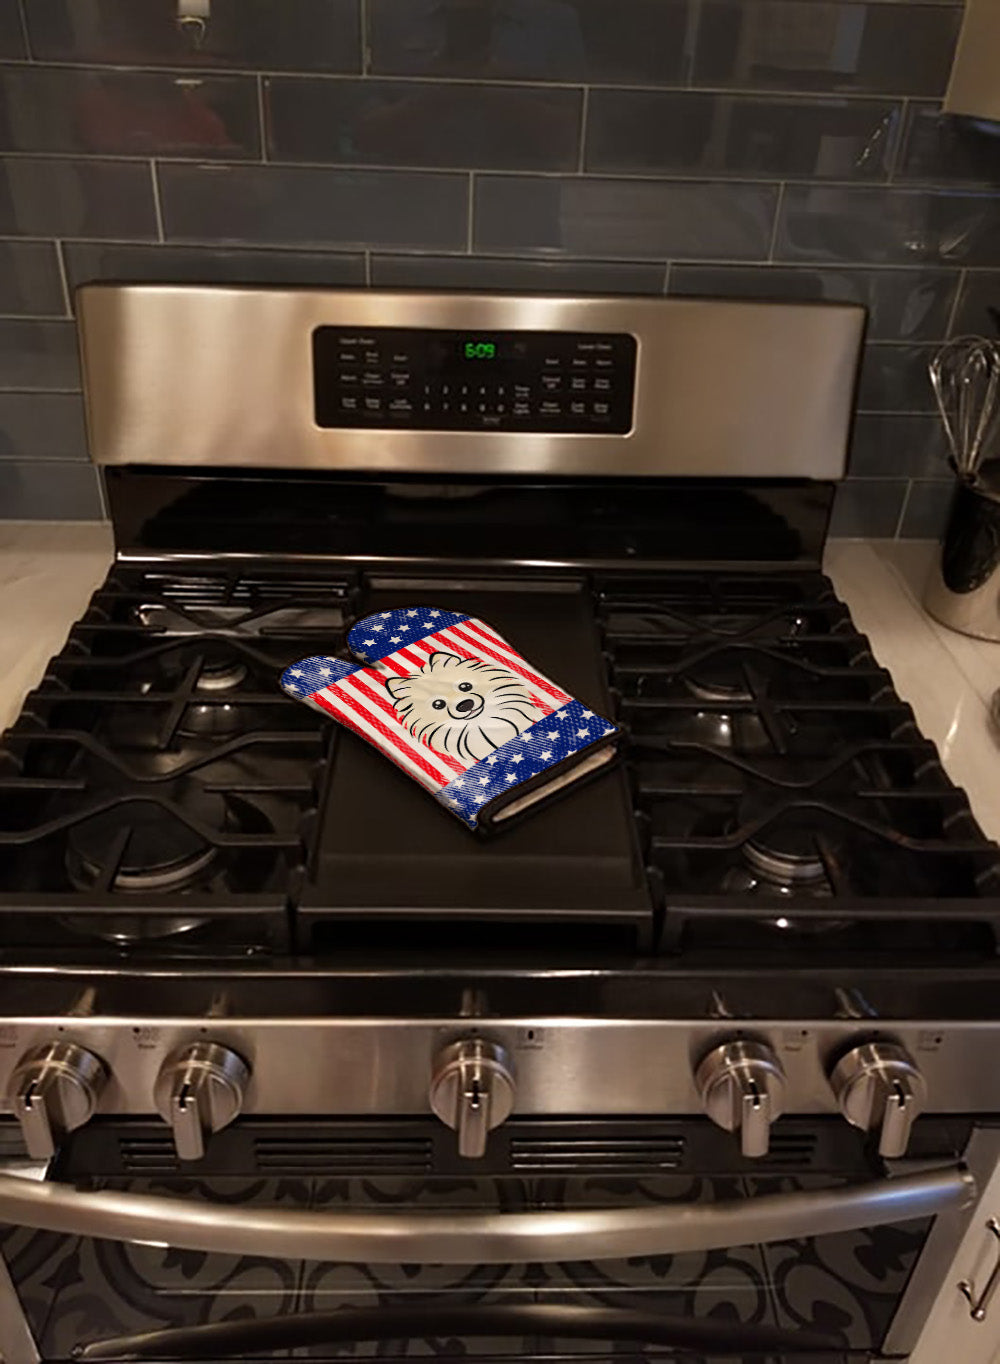 American Flag and Pomeranian Oven Mitt BB2137OVMT  the-store.com.